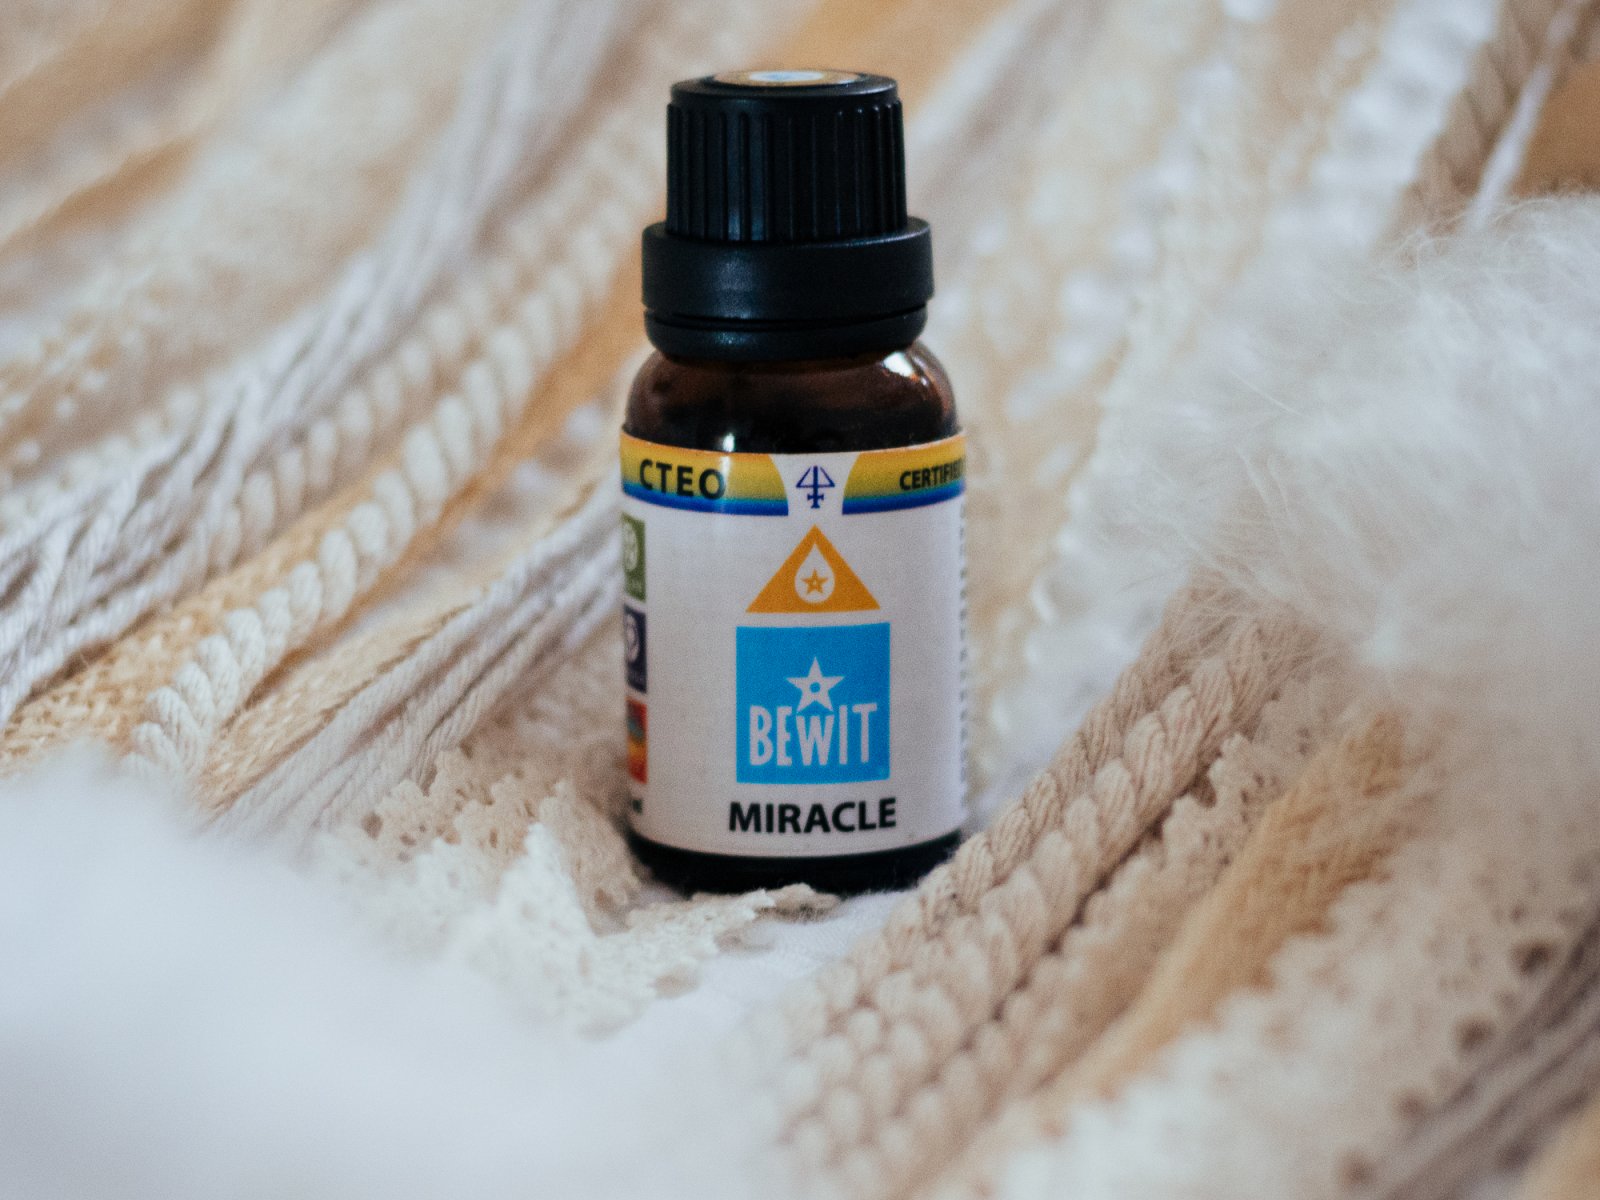 BEWIT MIRACLE - 100% natural essential oil blend in CTEO® quality - 4